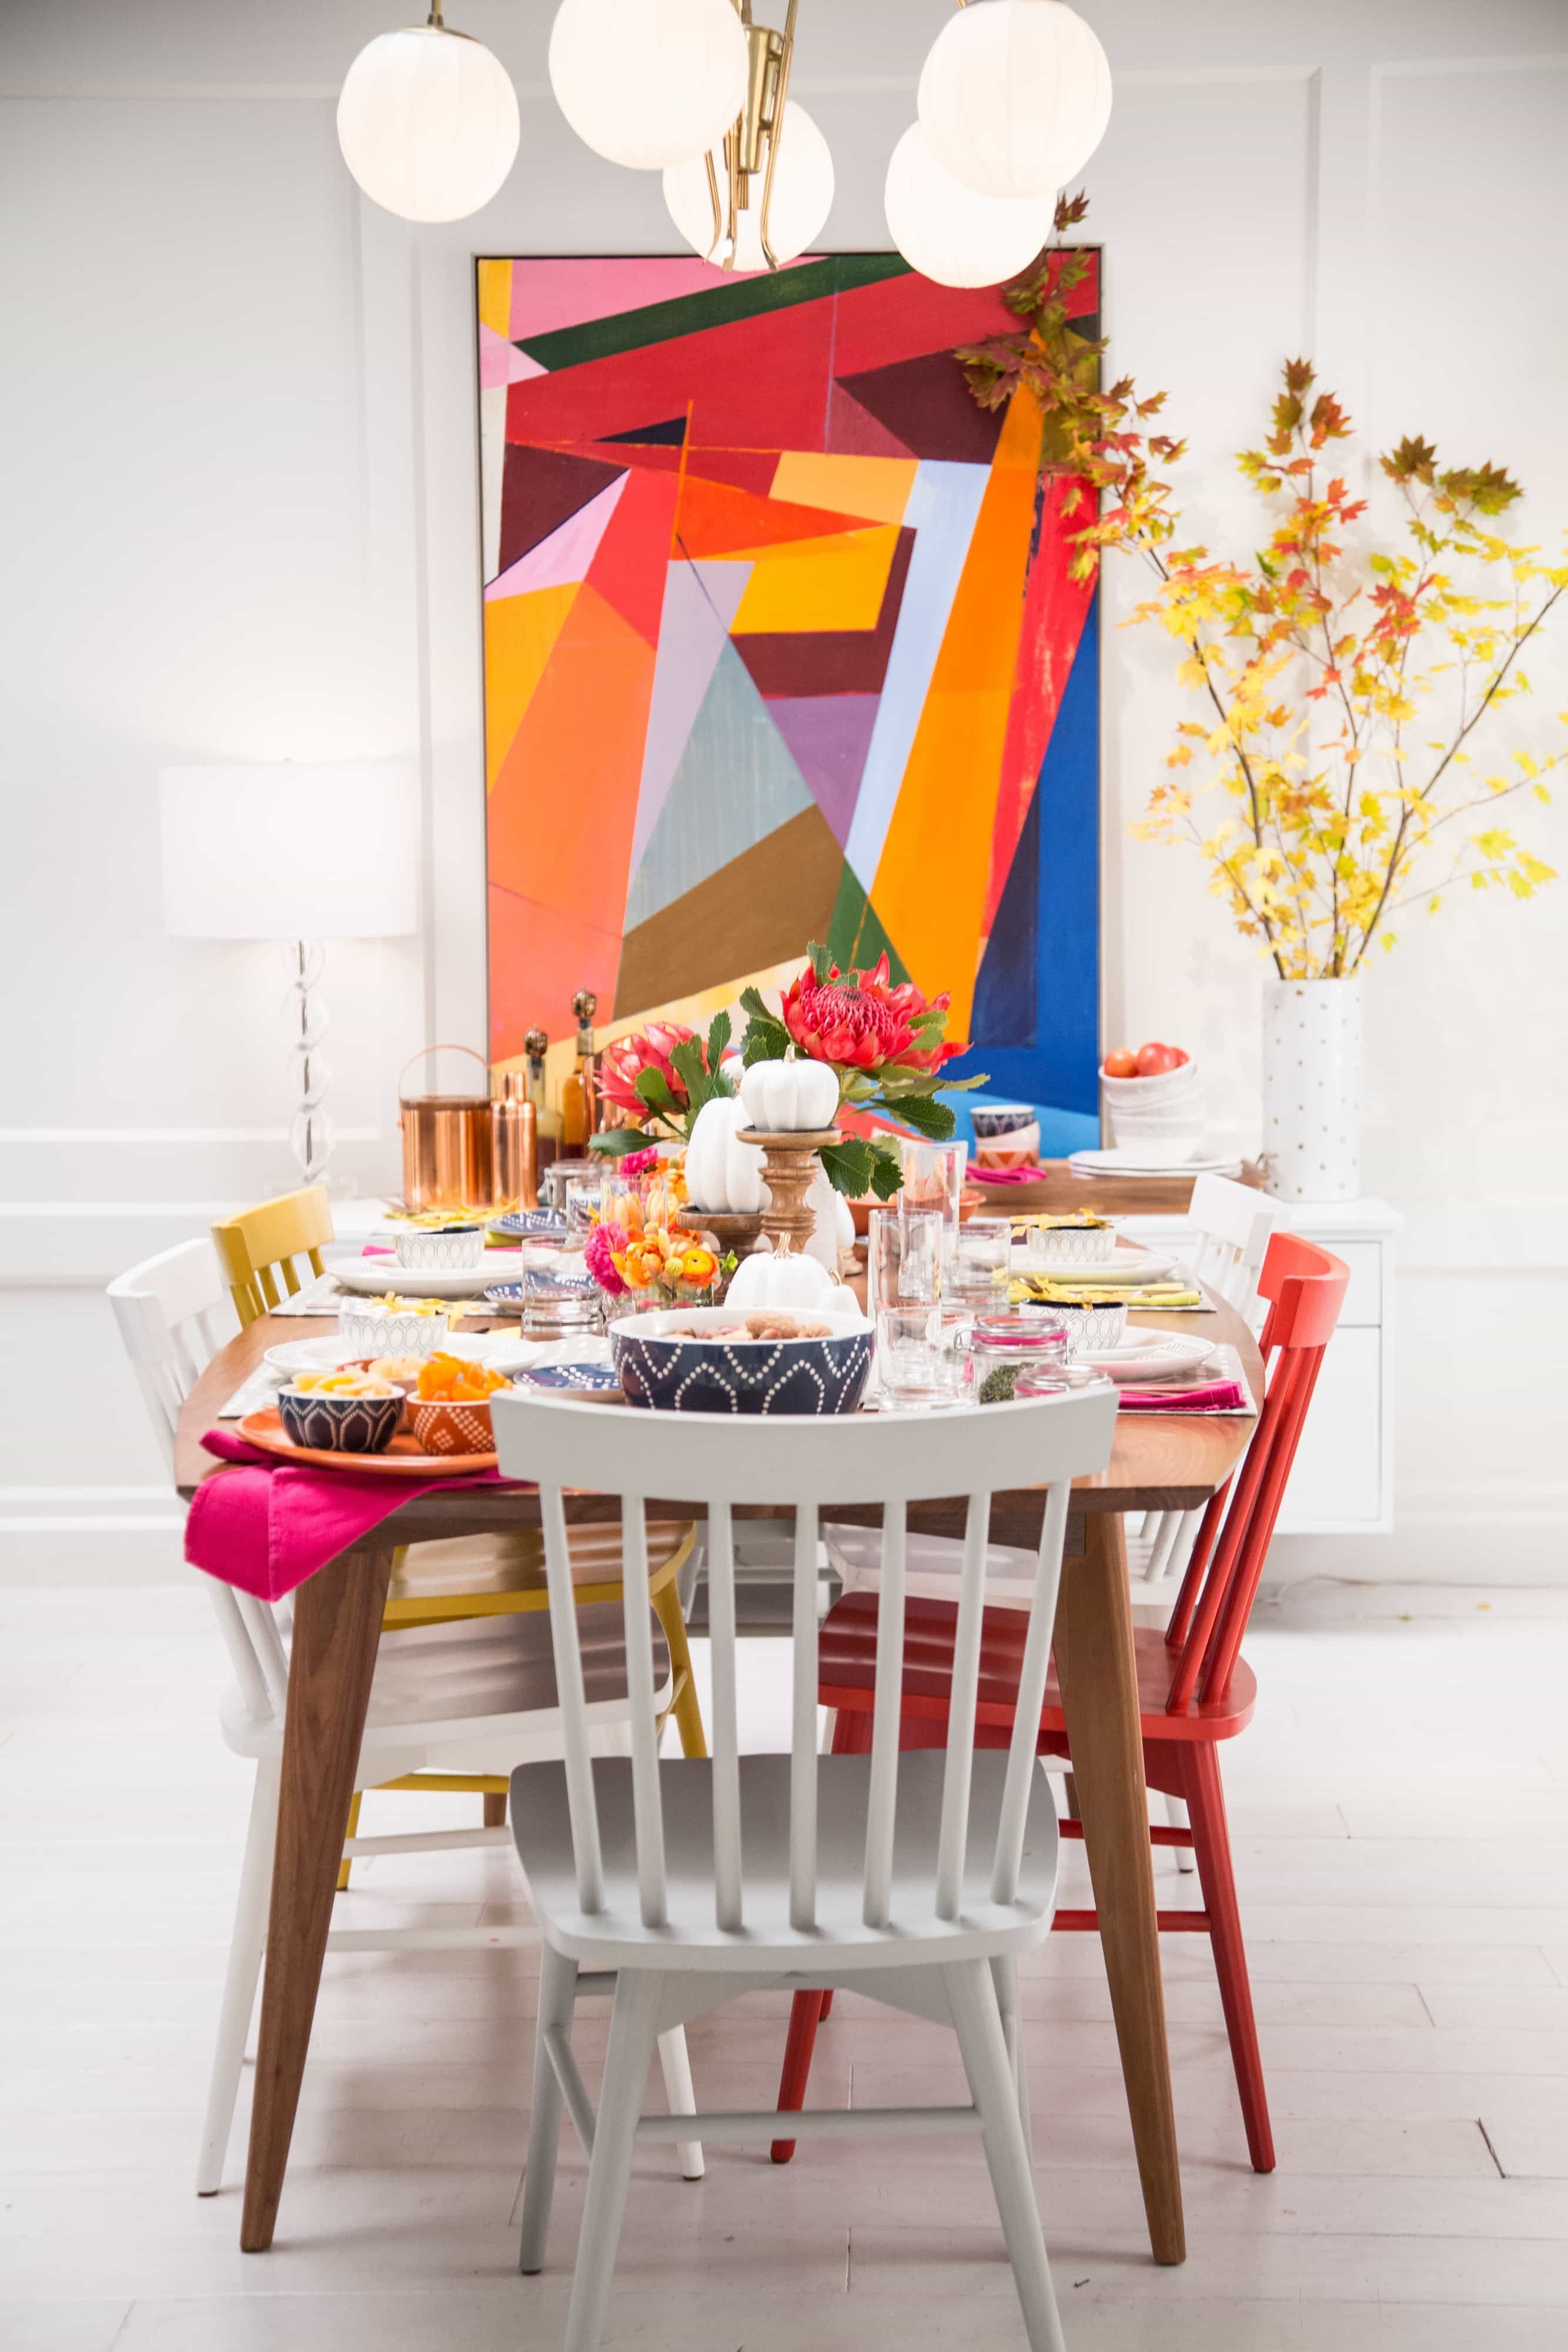 Featured Photo of Cozy Colorful Dining Room Around Artwork